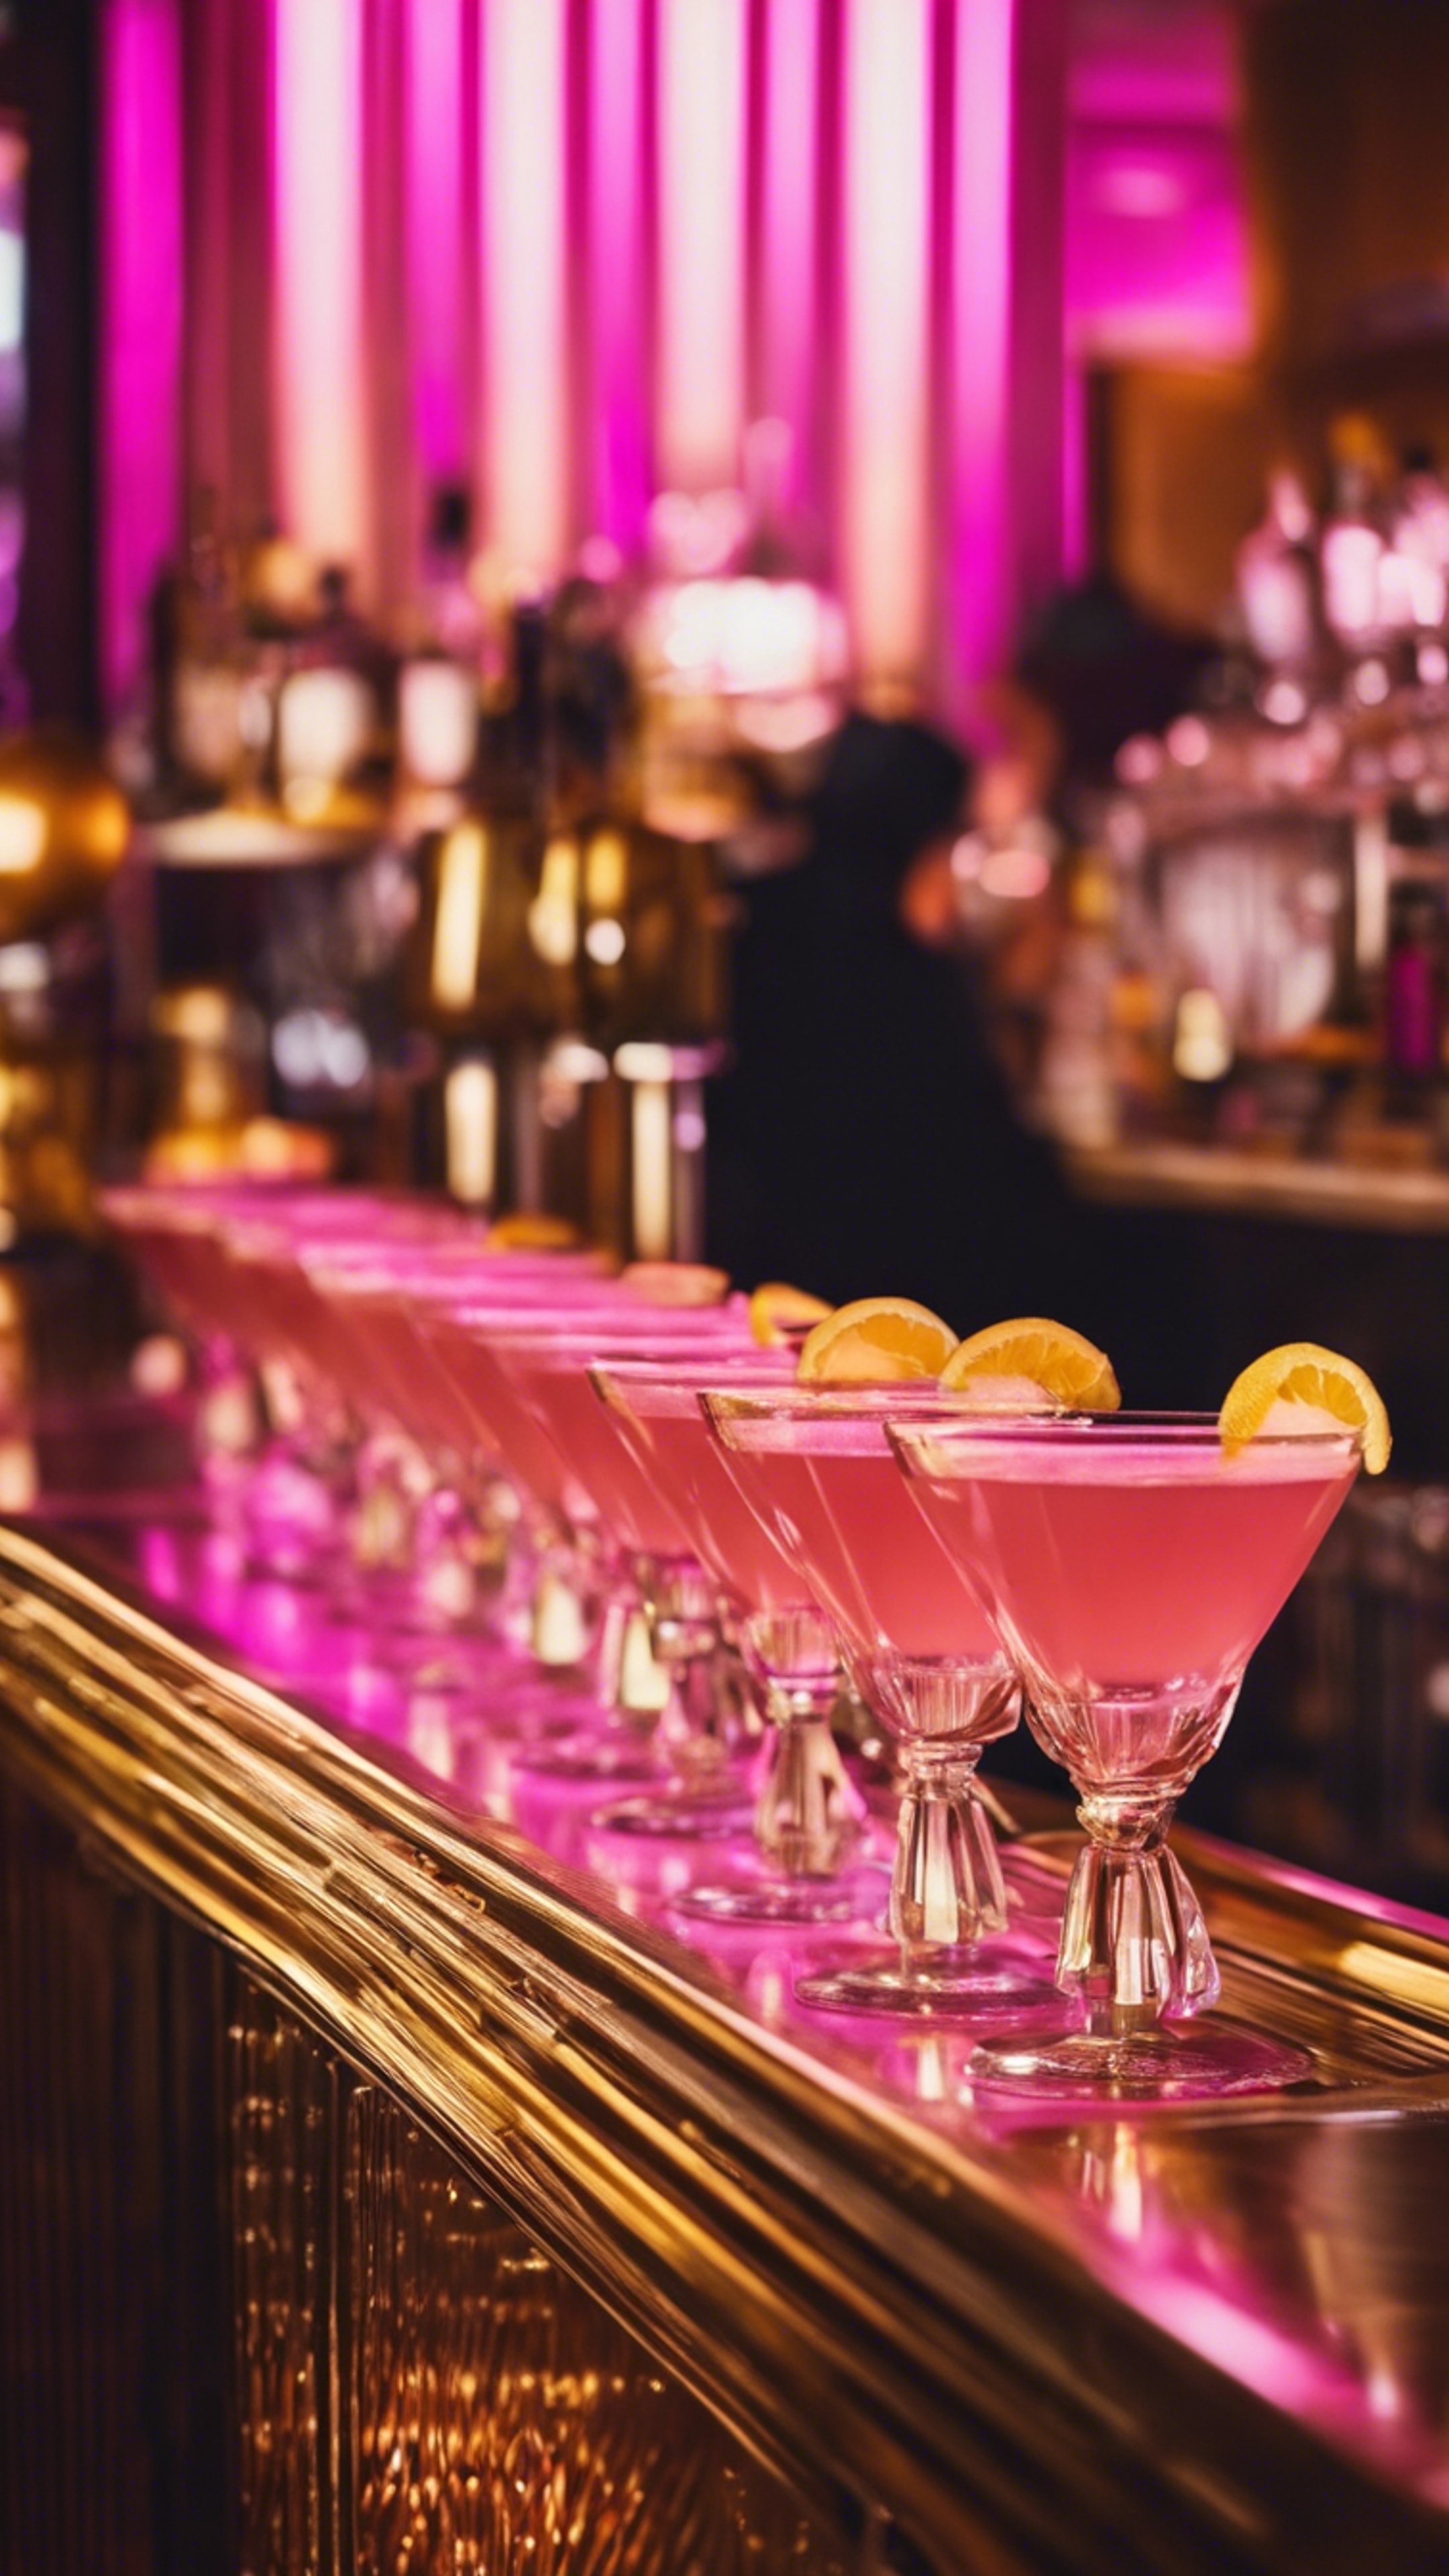 An art deco style pink and gold cocktail bar, bustling with glamour and elegance.壁紙[0d4a66f95ef04aa3ad16]